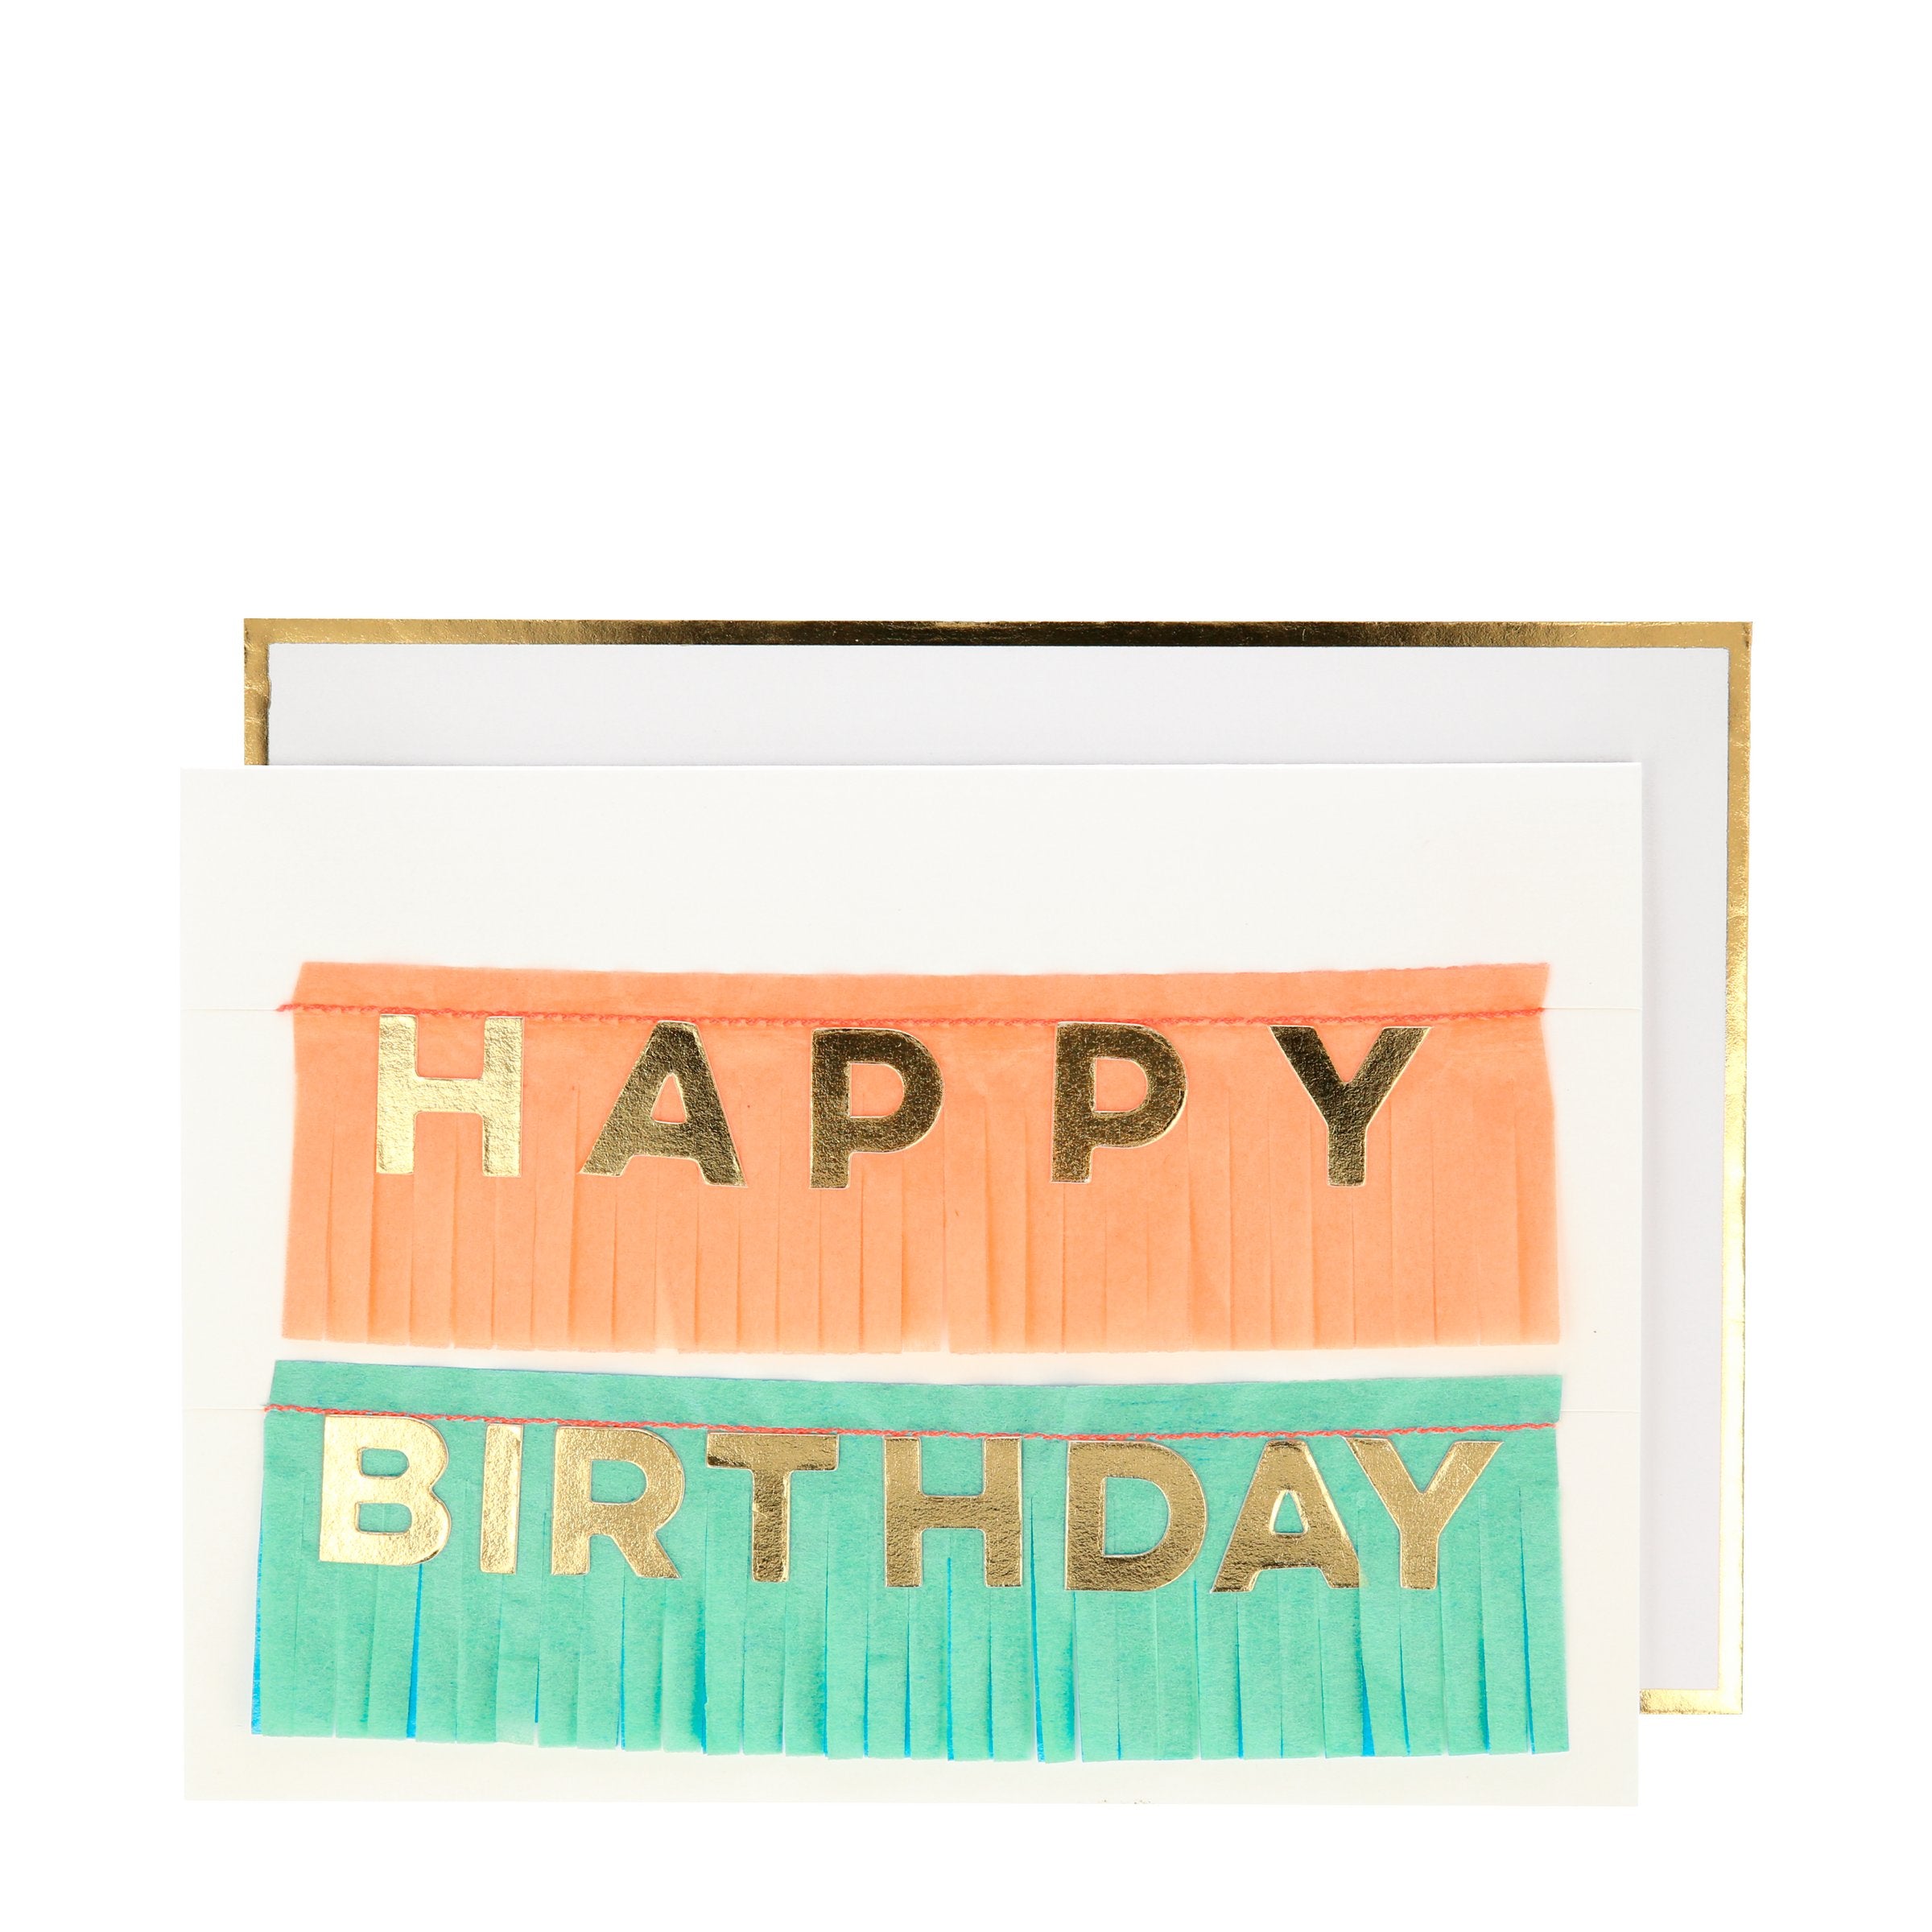 This birthday card is also a birthday garland with gold foil letters.